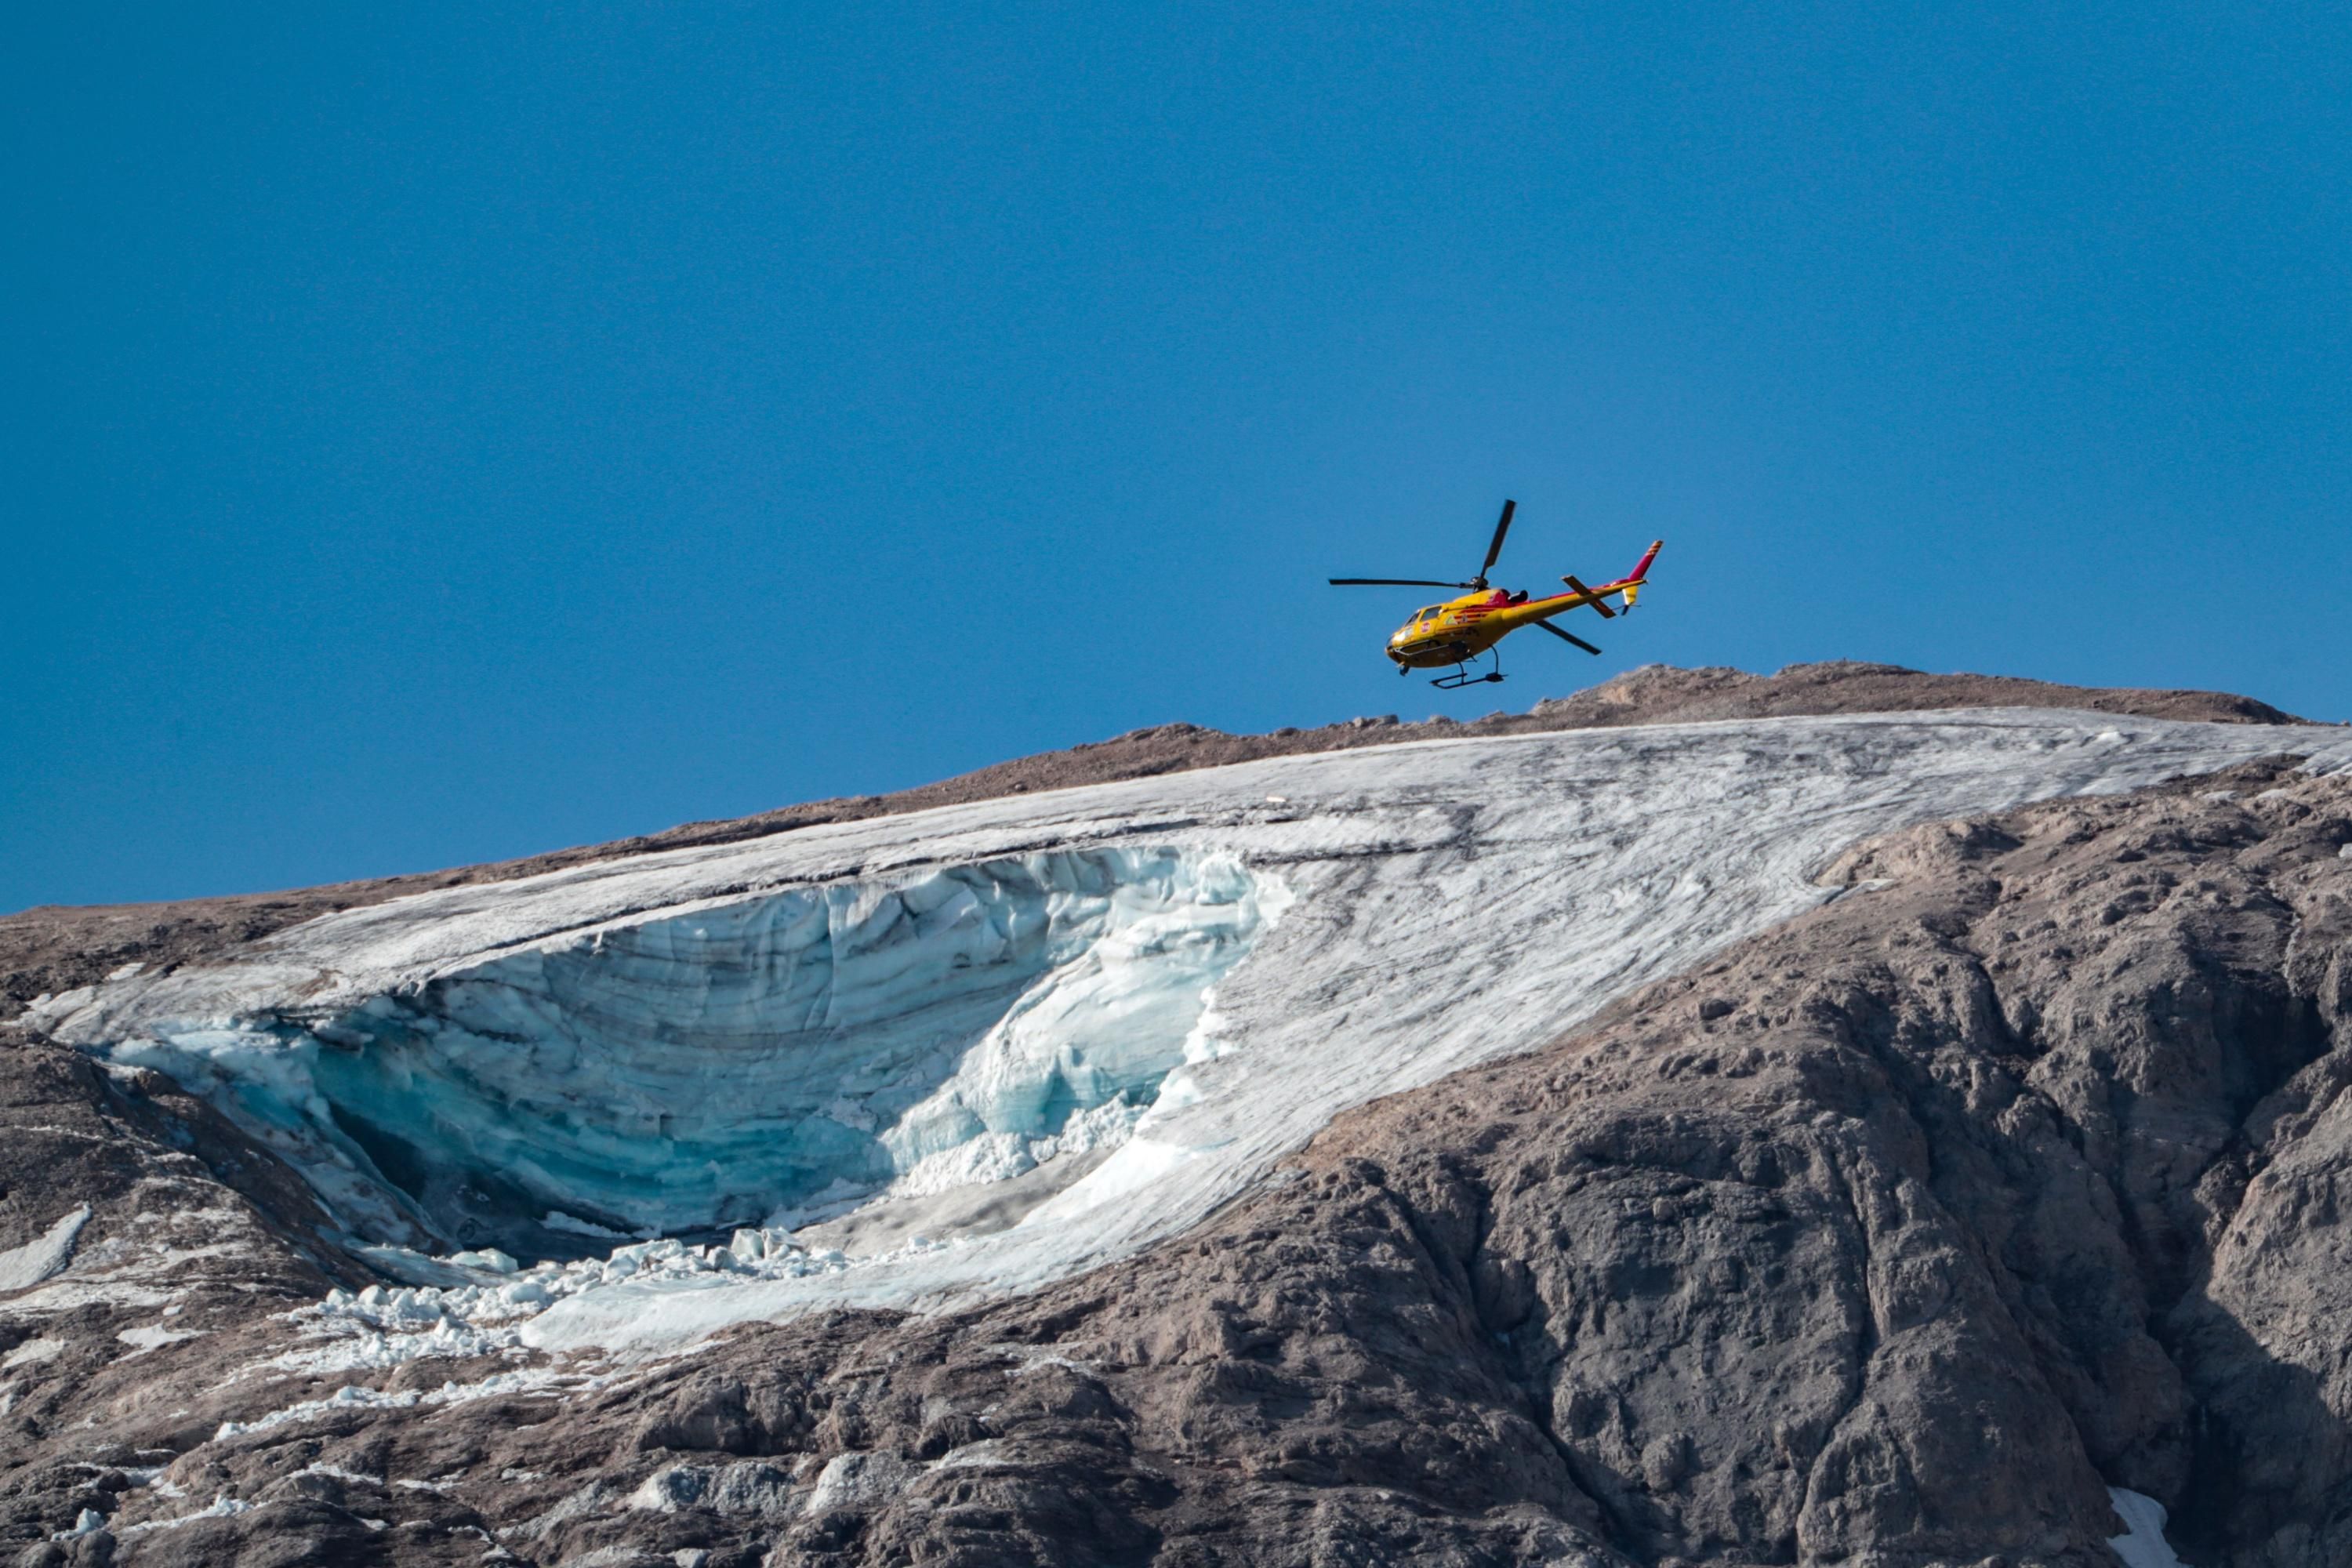 A rescue helicopter over collapsed glacier